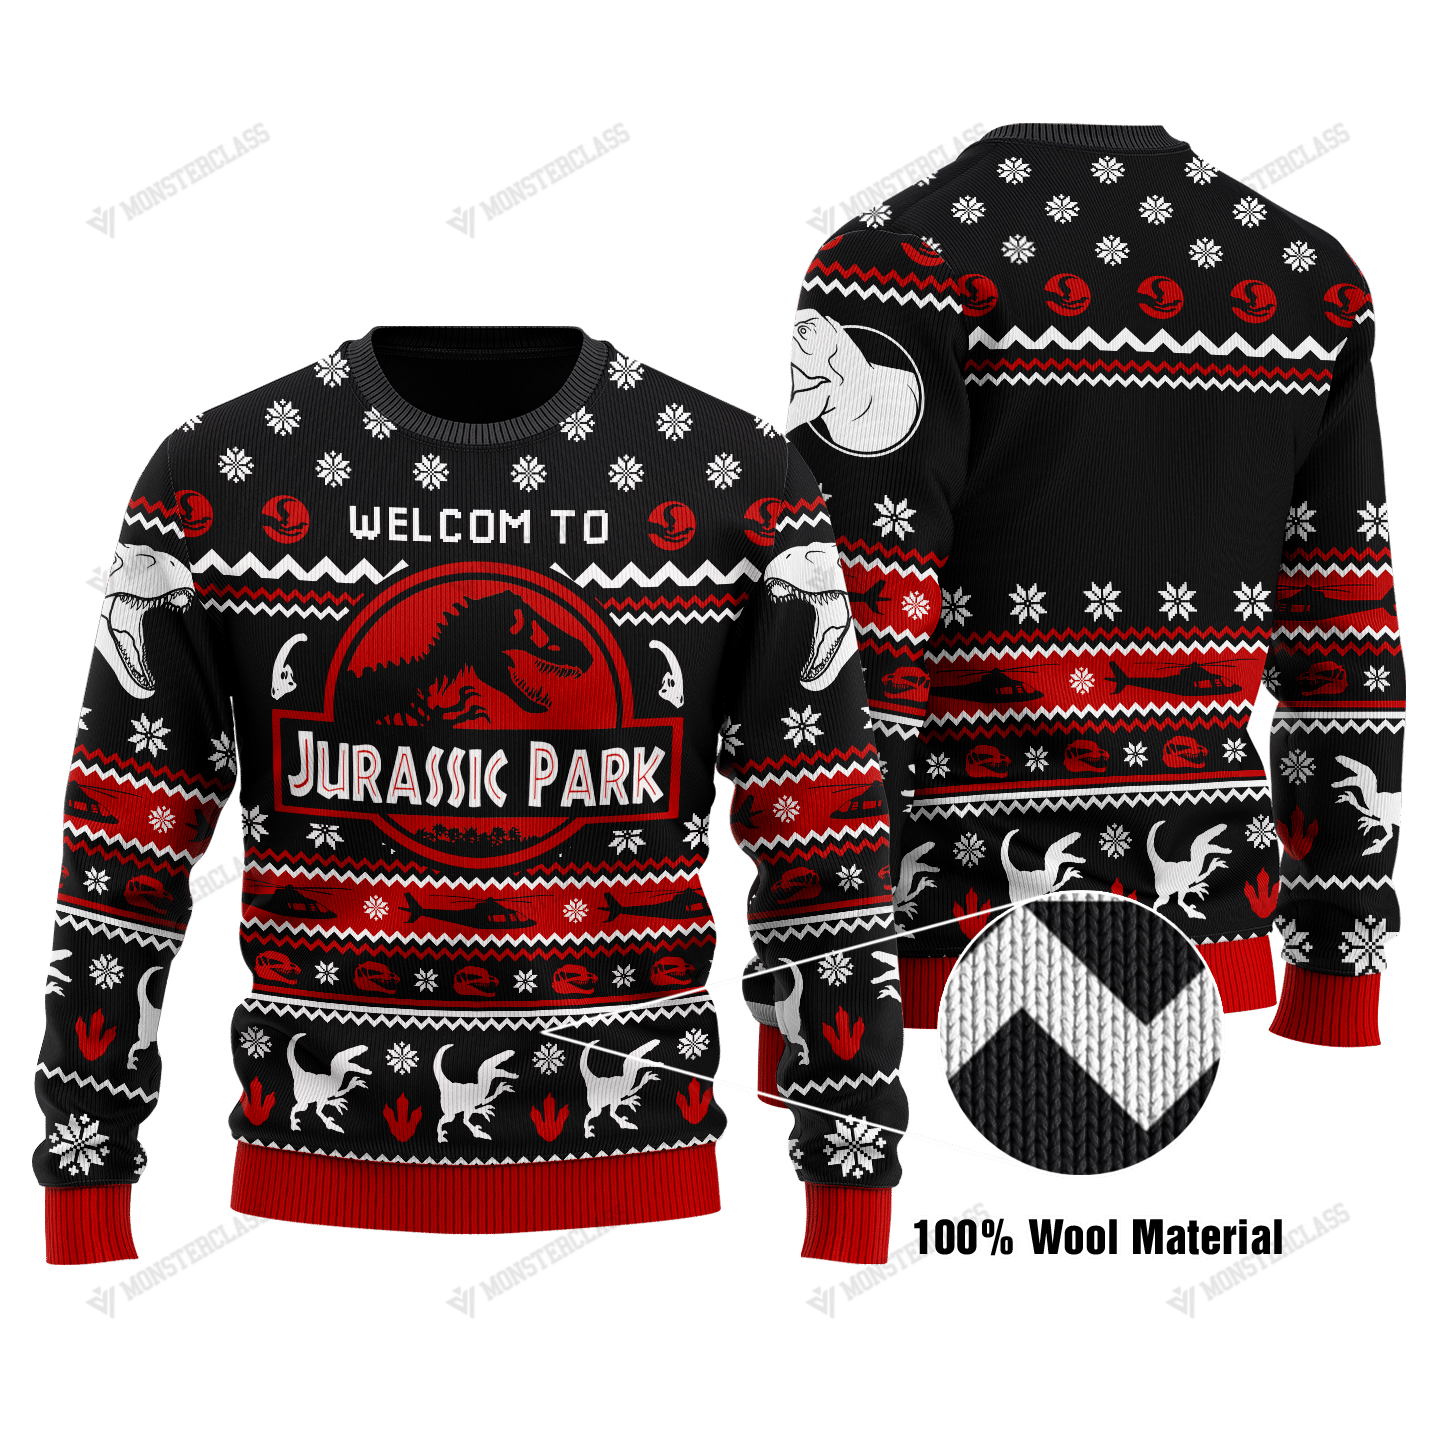 Welcome to Jurassic Park christmas sweater